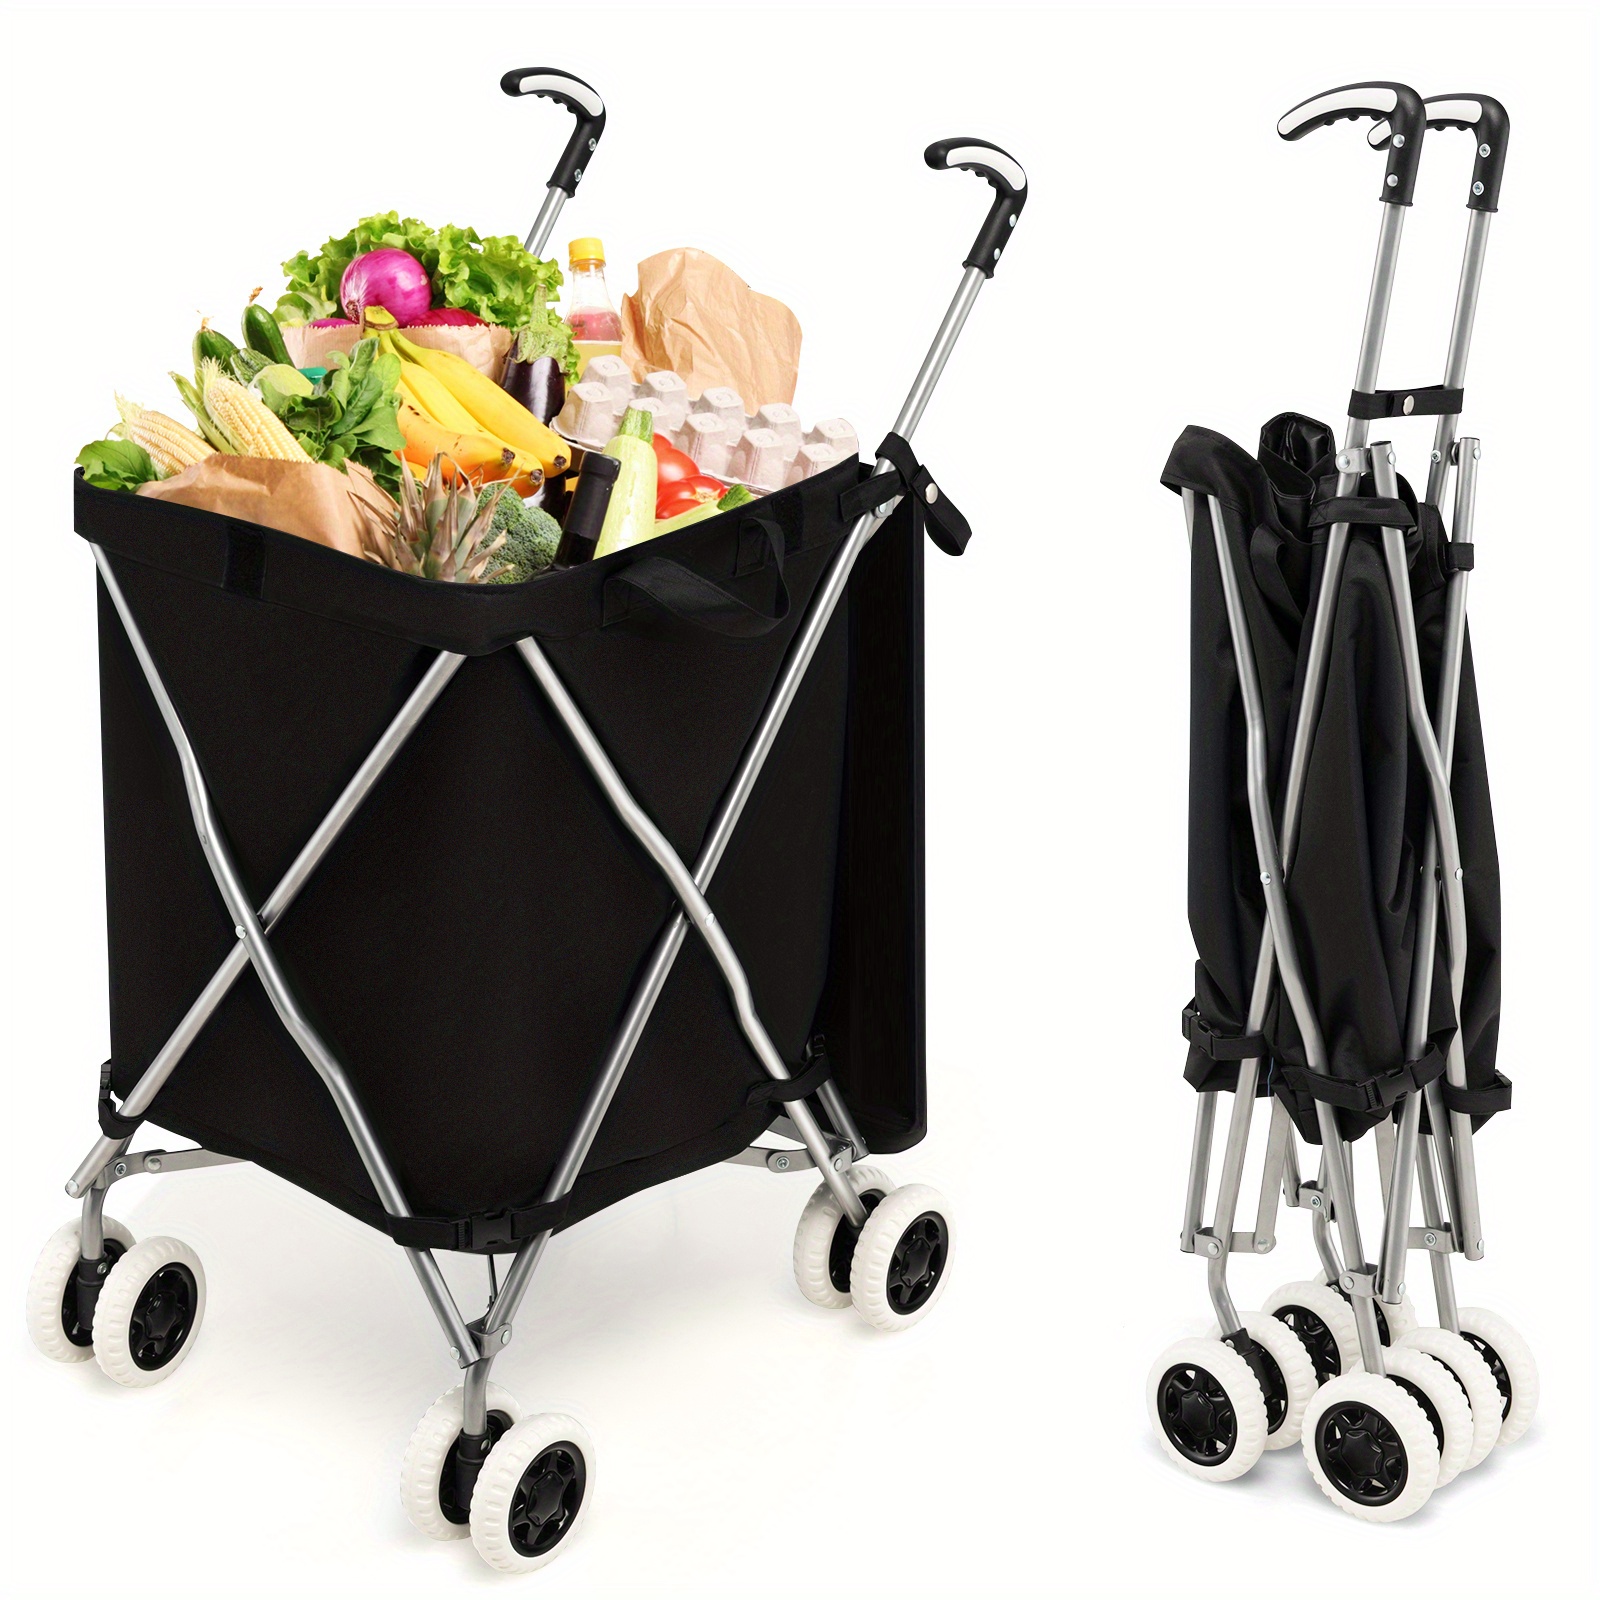 

Golpus Folding Shopping Cart Utility W/ Water-resistant Removable Canvas Bag Black